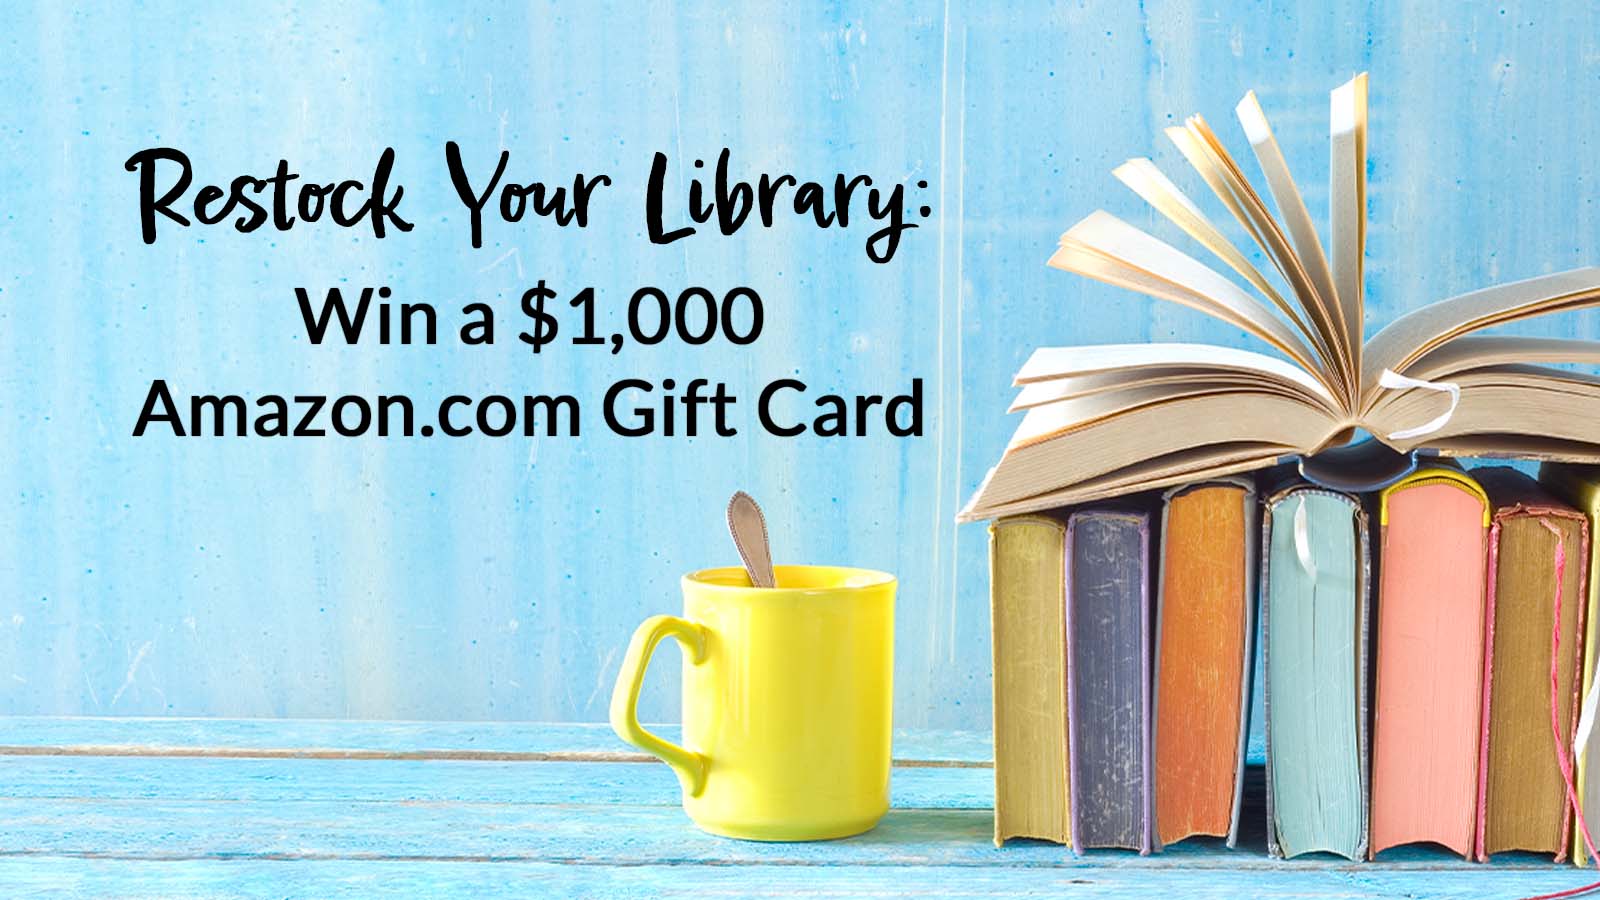 Restock your library: win a $1,000 Amazon.com gift card.